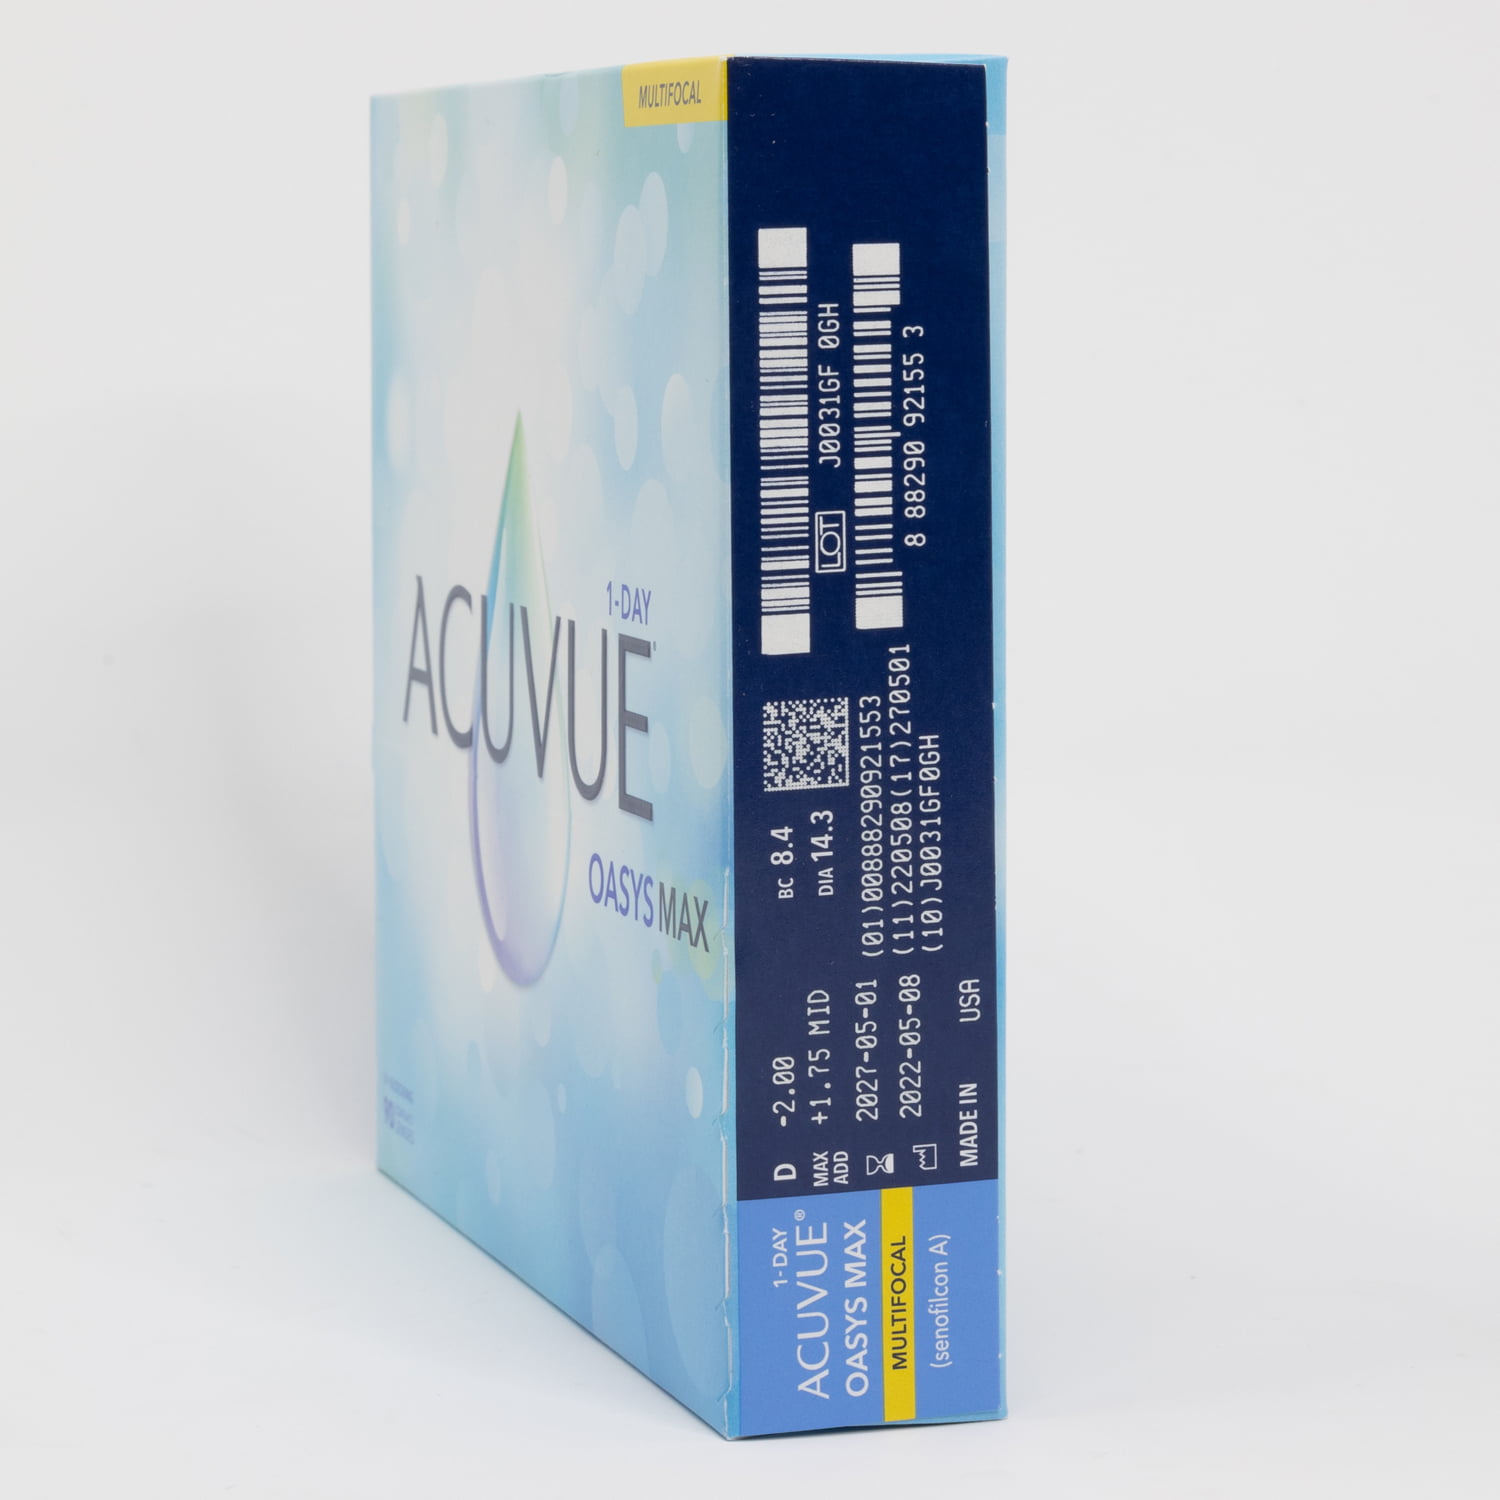 acuvue-oasys-max-1-day-multifocal-90-pack